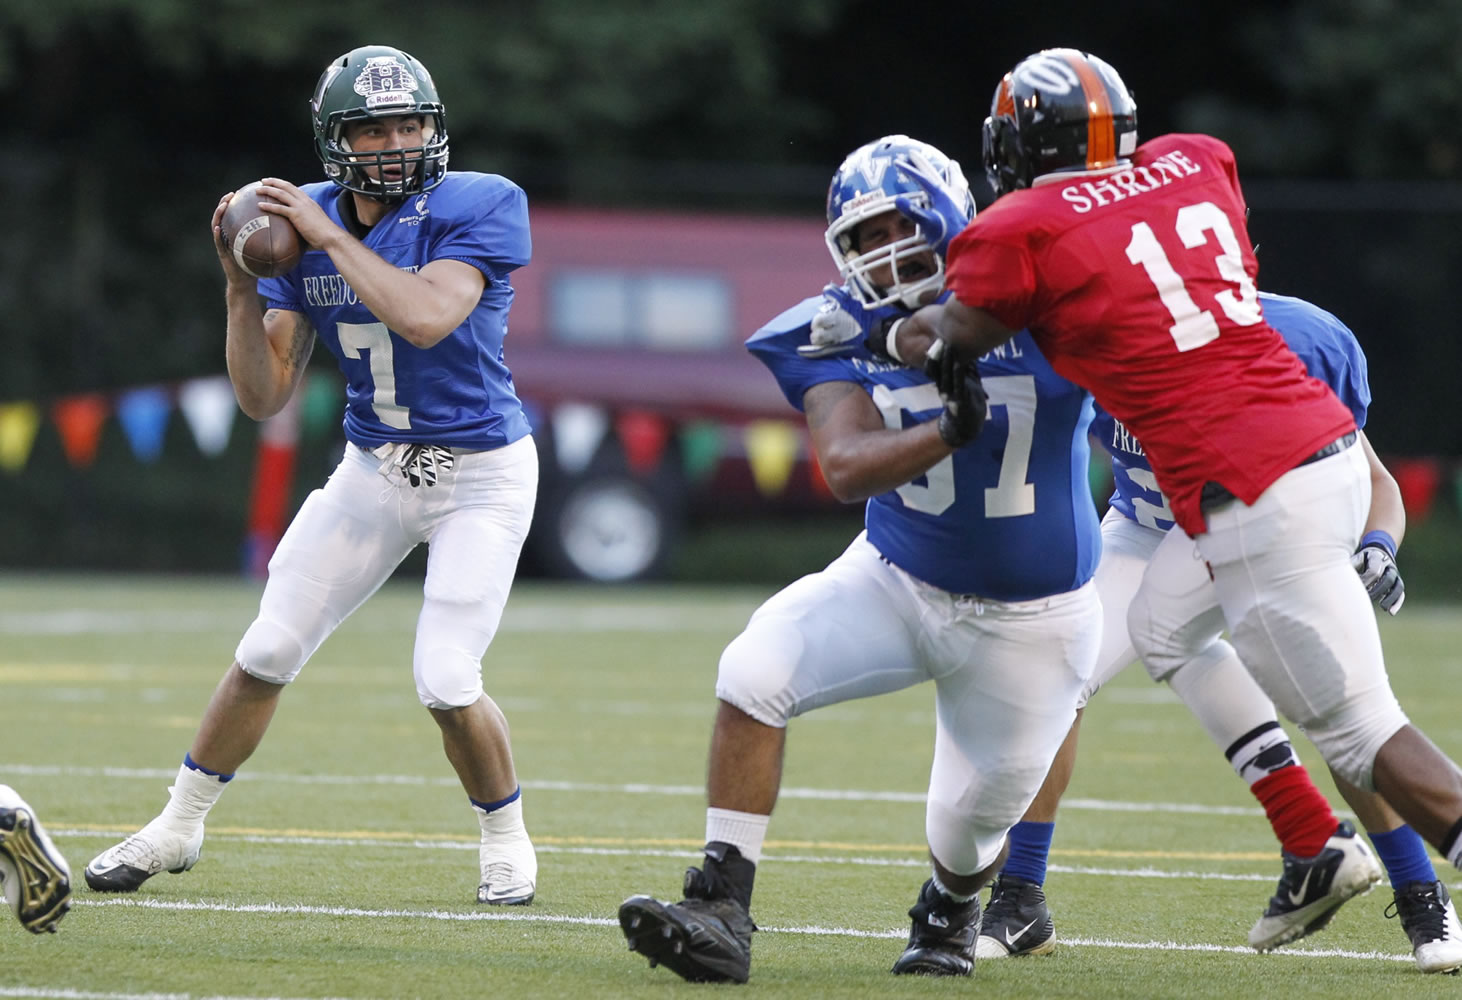 East quarterback Anthony Thomas of Evergreen drops back to pass during Freedom Bowl at Kiggins Bowl.